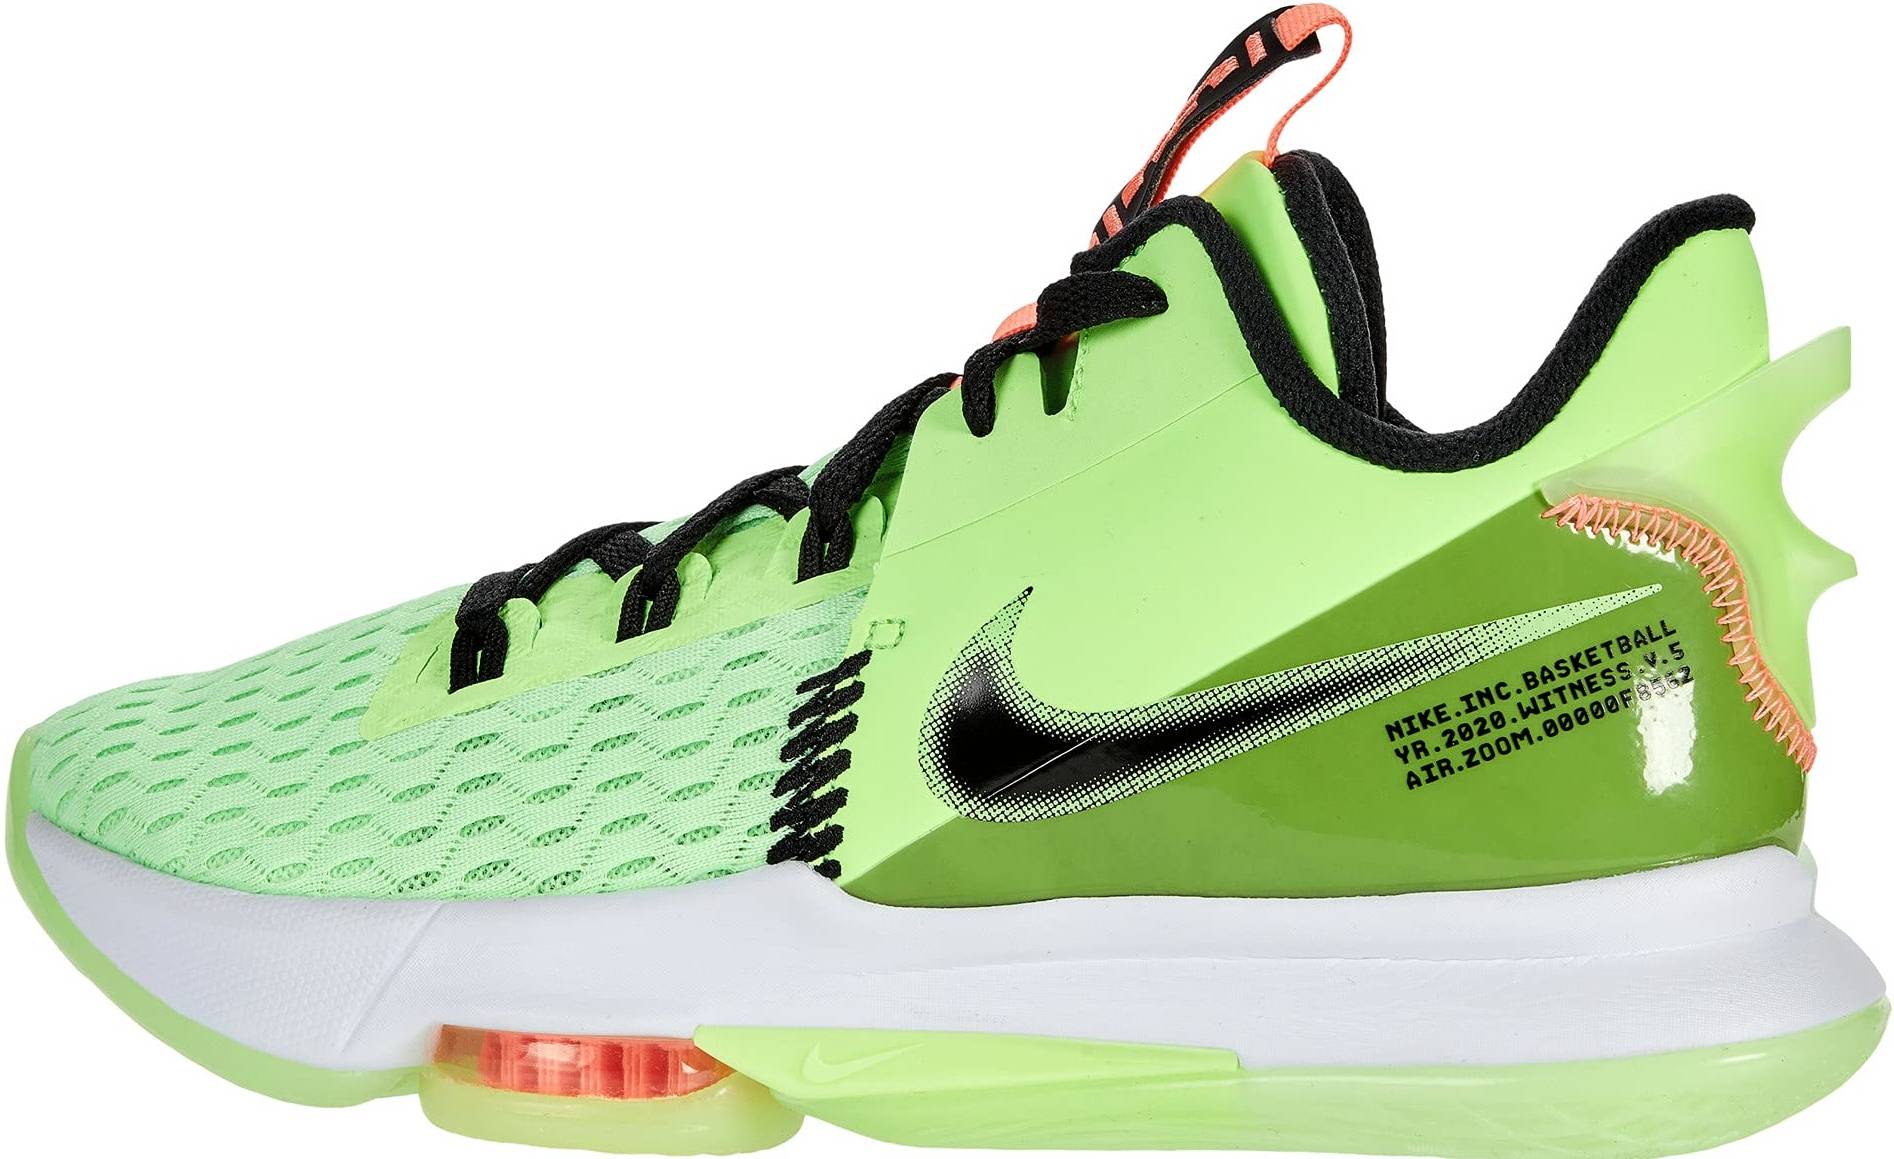 Neon Basketball Shoes | peacecommission.kdsg.gov.ng